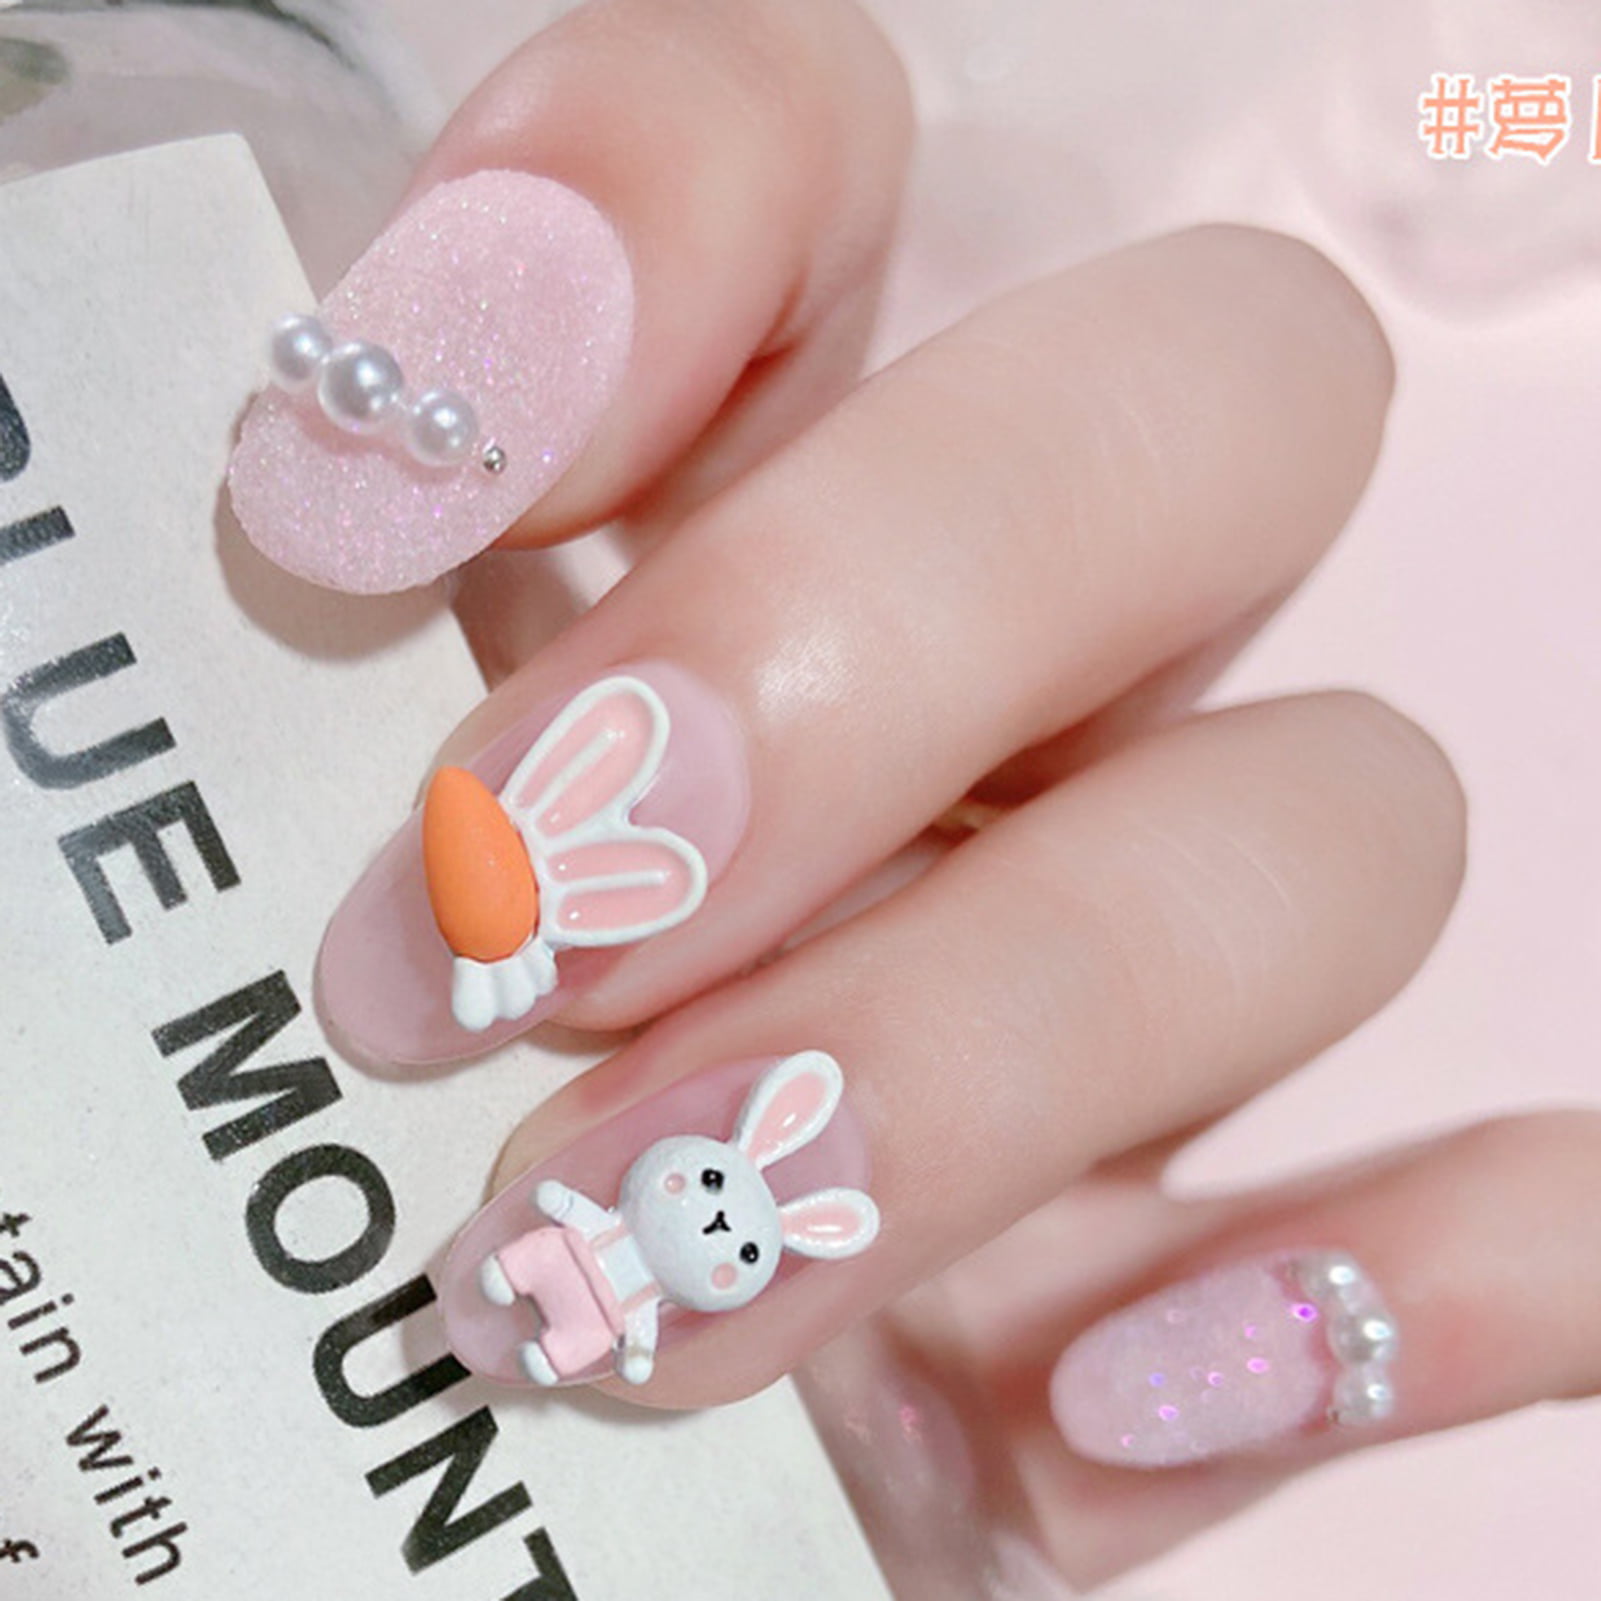 Bunny Nails: Chocolate dipped w/ Candy Nail Art & How To